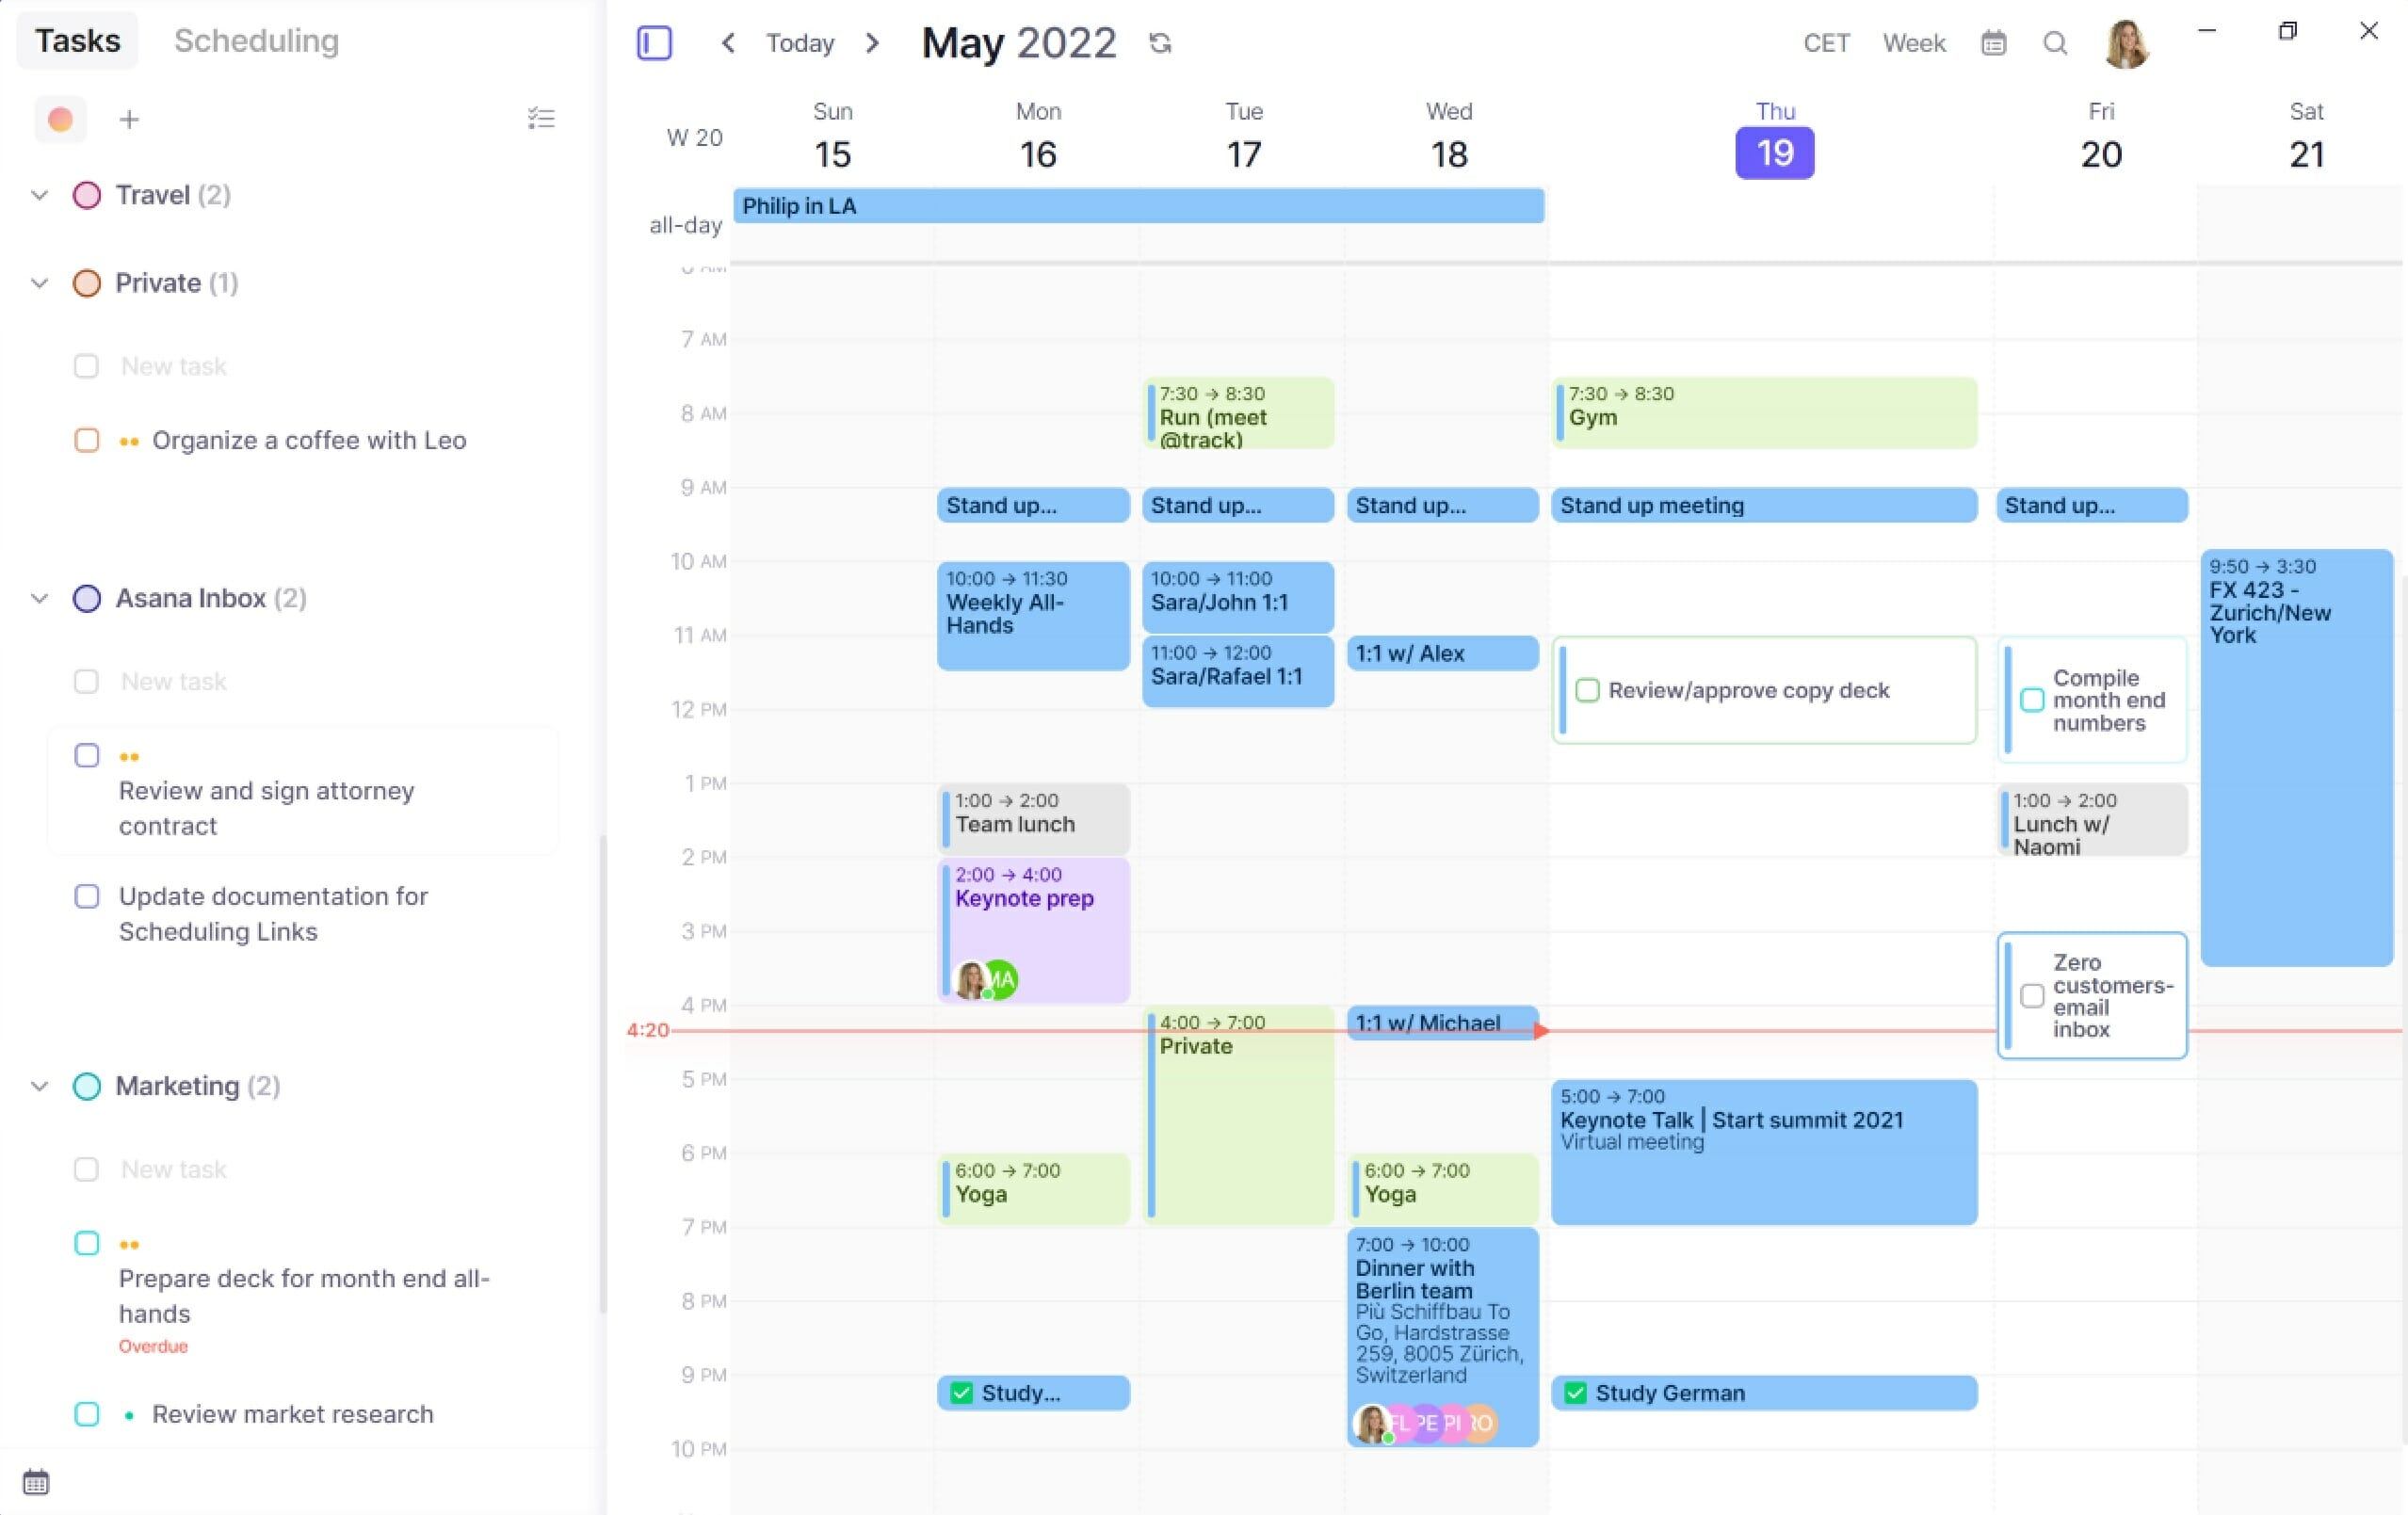 Consolidate your Scheduling, Calendars and To Do's with the App